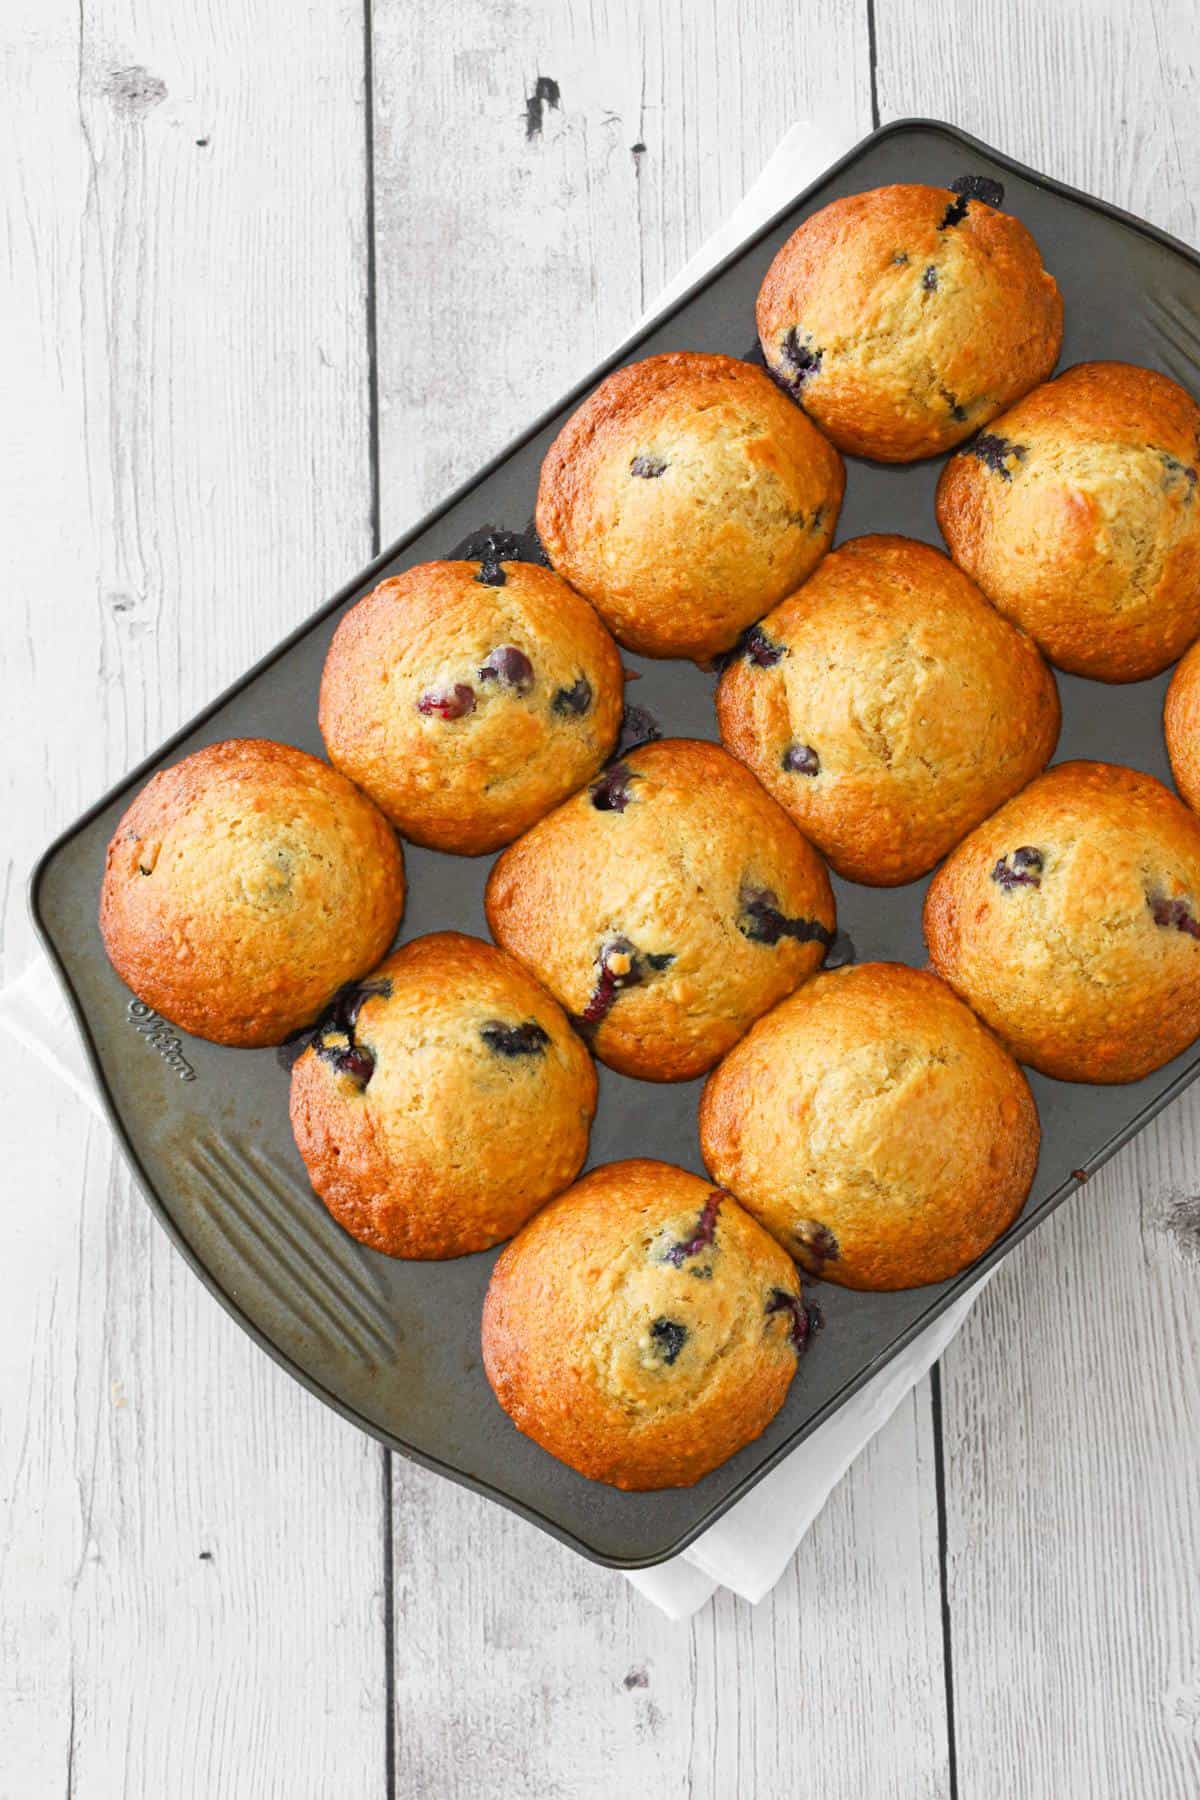 Banana Blueberry Muffins are moist and delicious homemade banana muffins loaded with fresh blueberries.